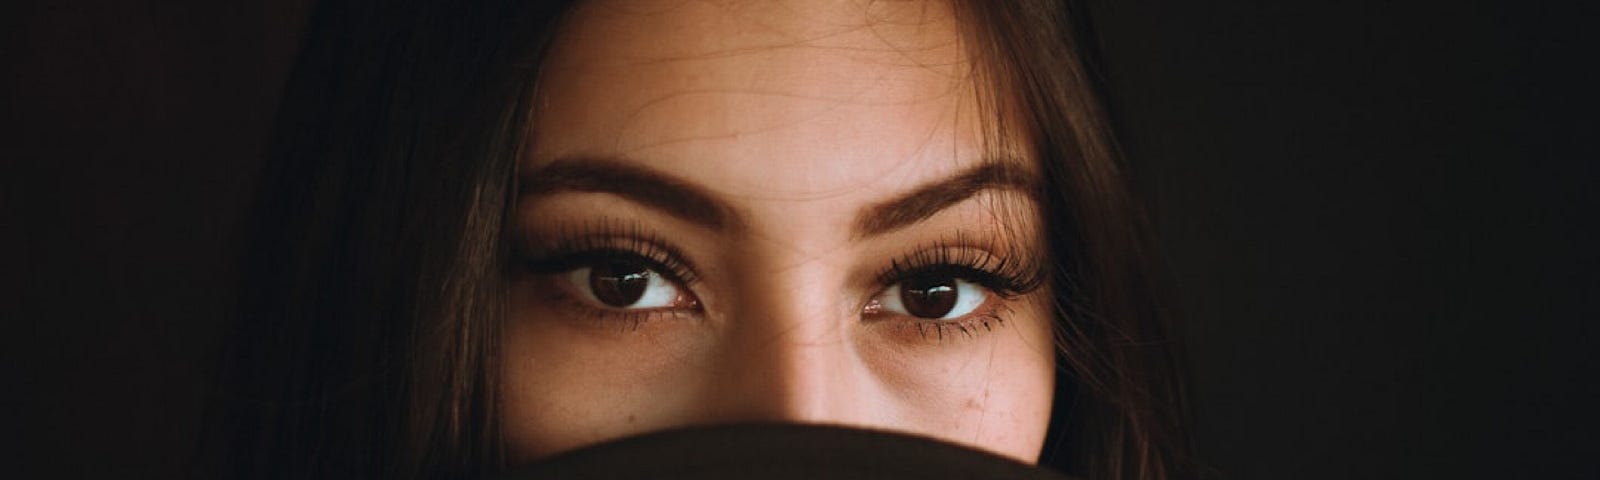 Allef Vinicius took this photo of a woman’s eyes and titled it “It’s All in This Look.”